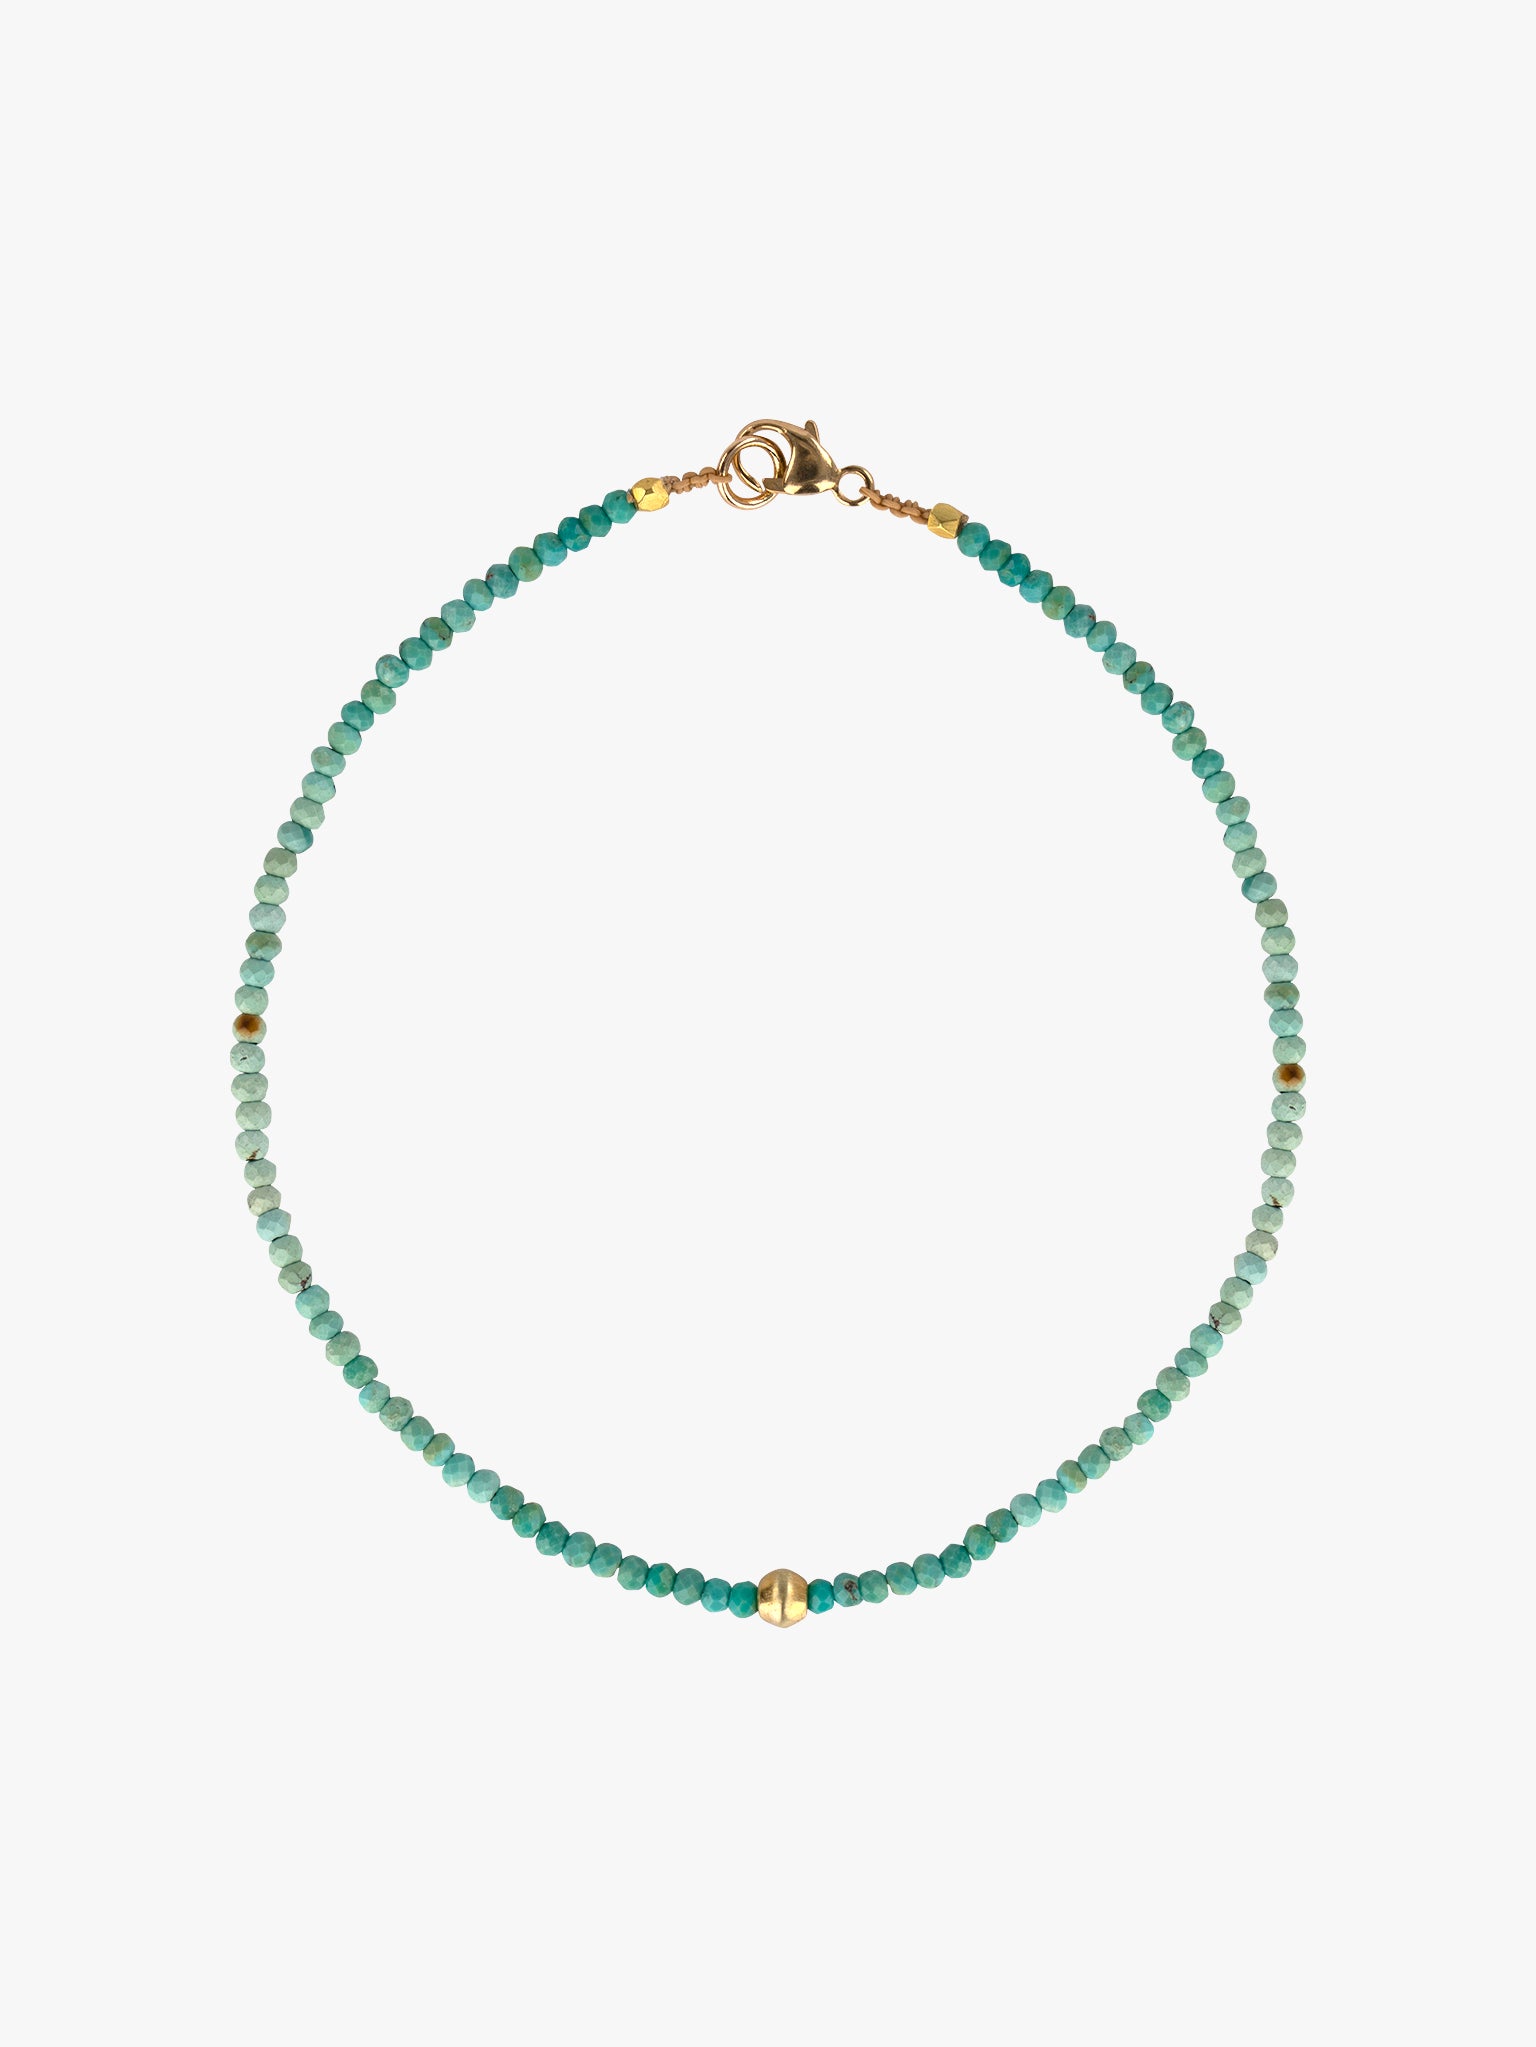 Ombre turquoise and gold beaded bracelet